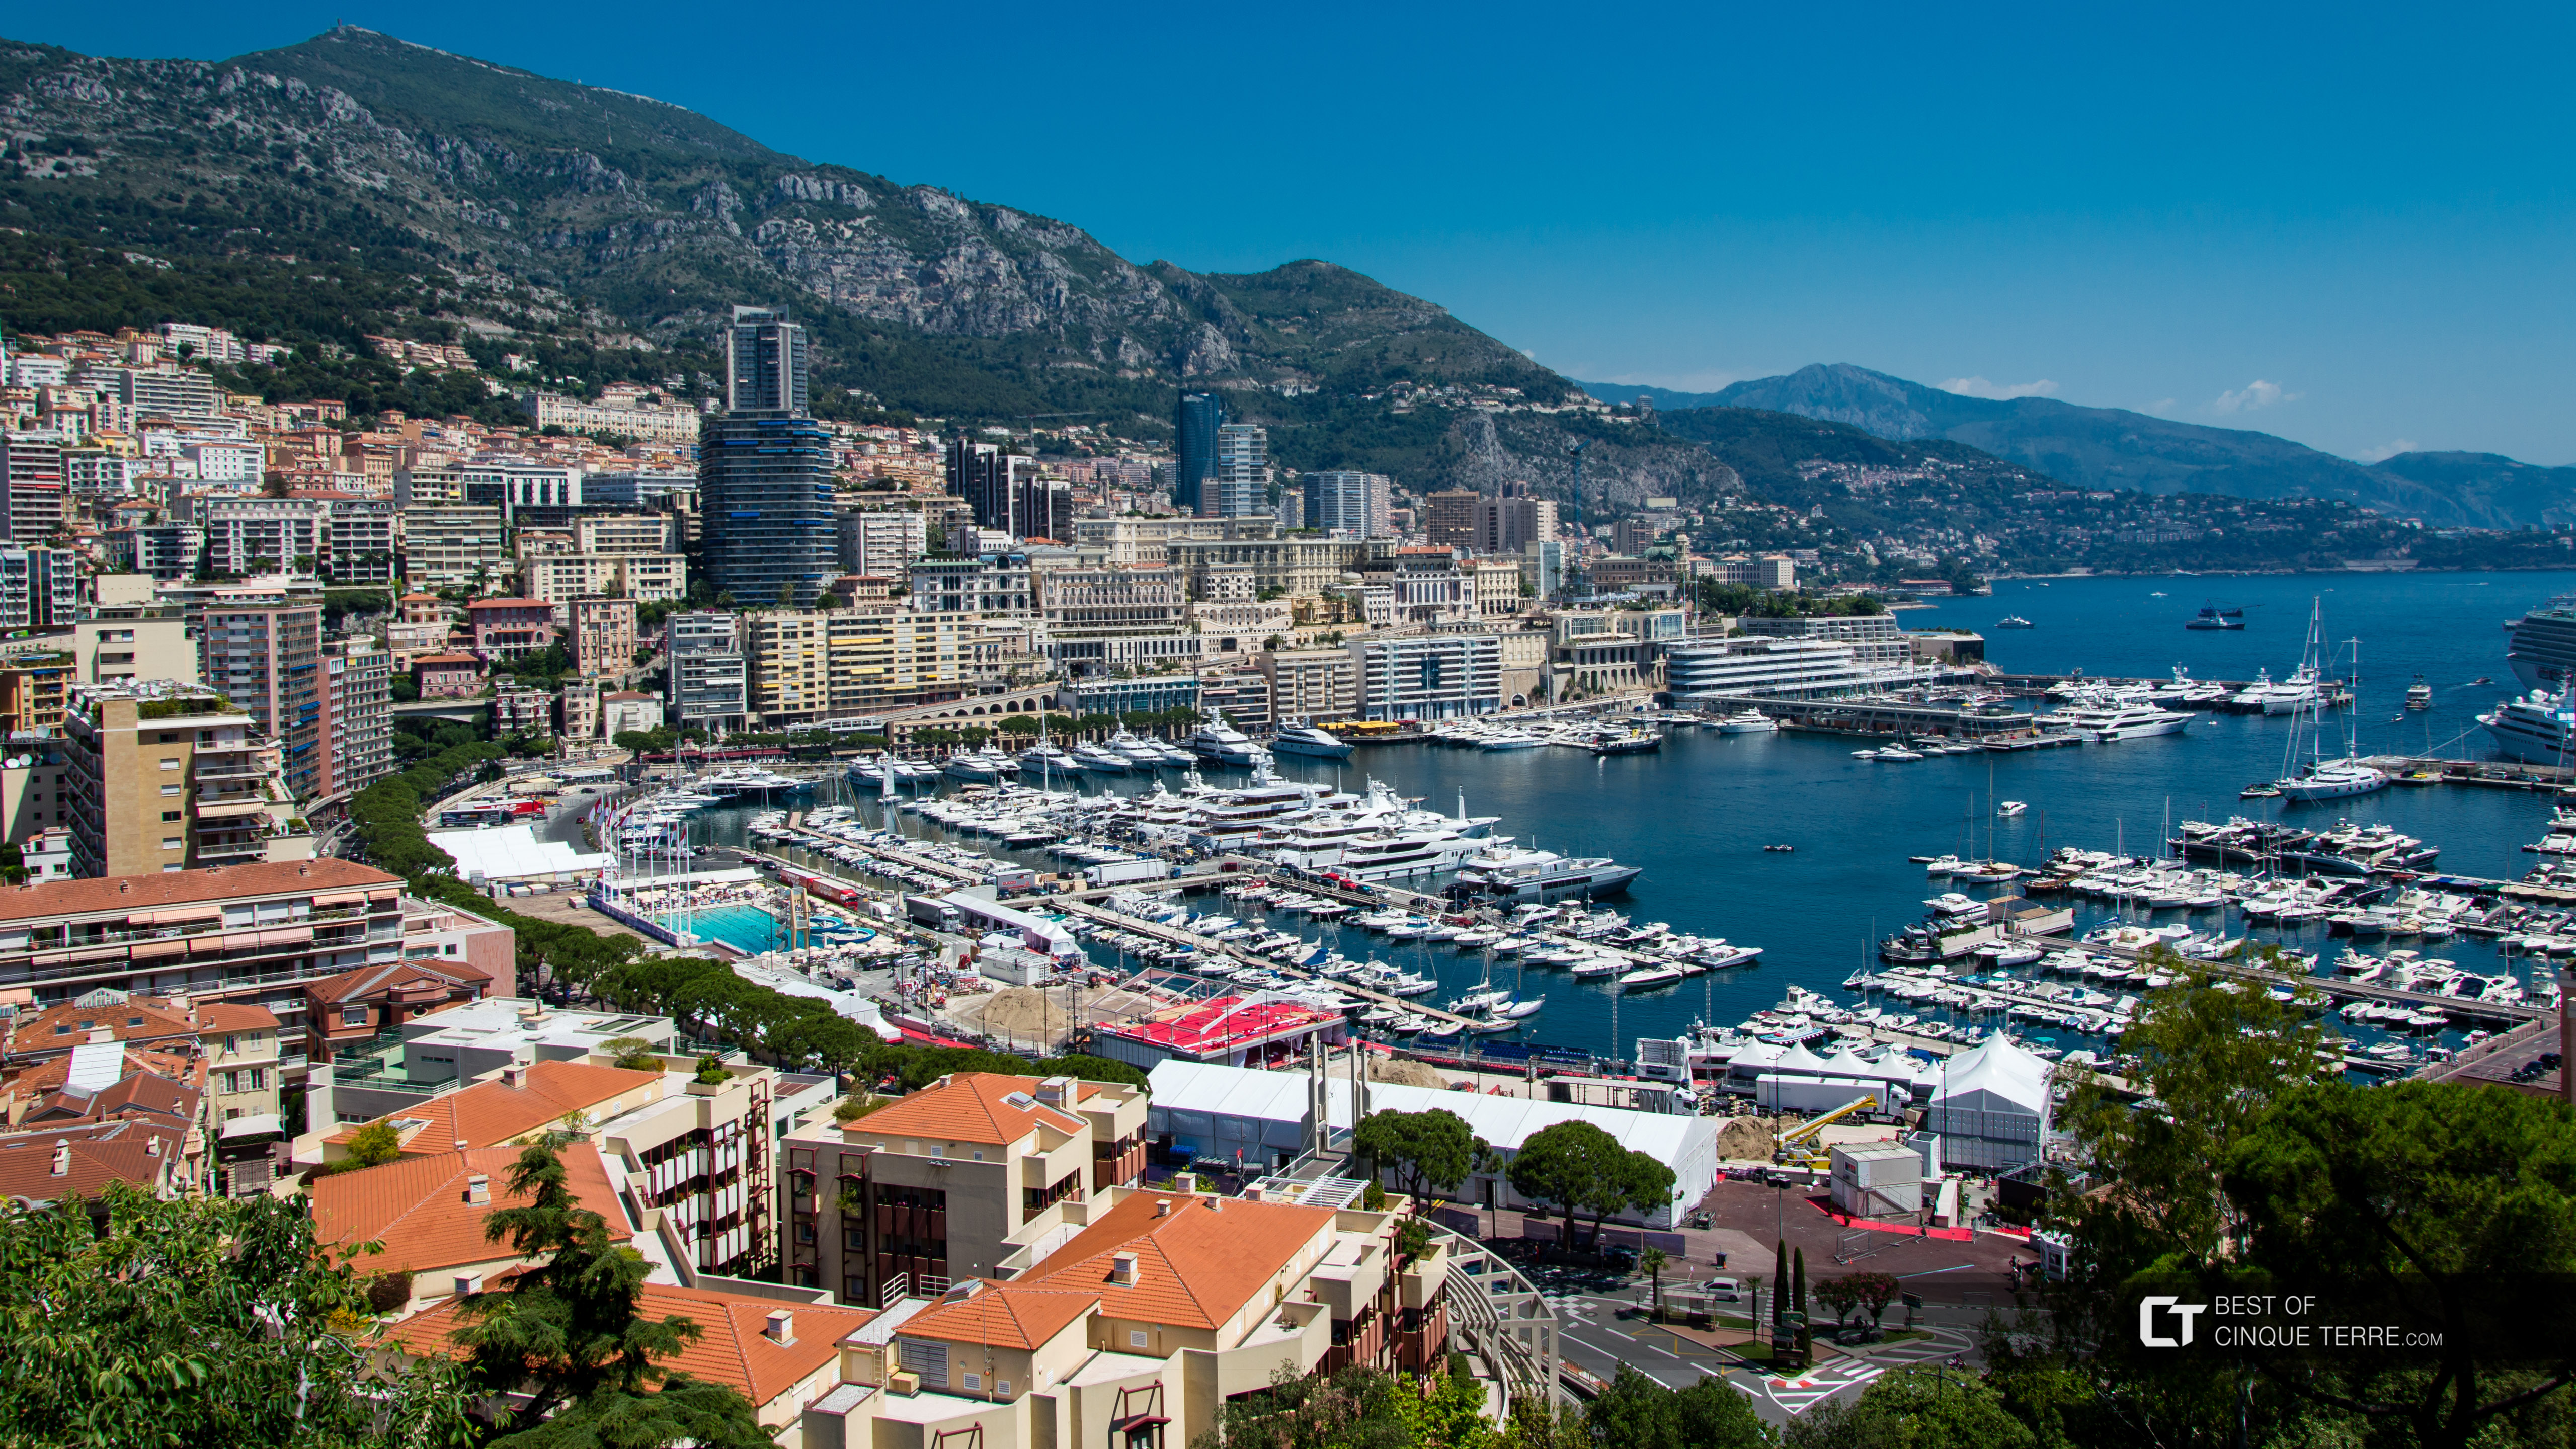 View of Monte Carlo harbor from the Prince's Palace square, Monaco